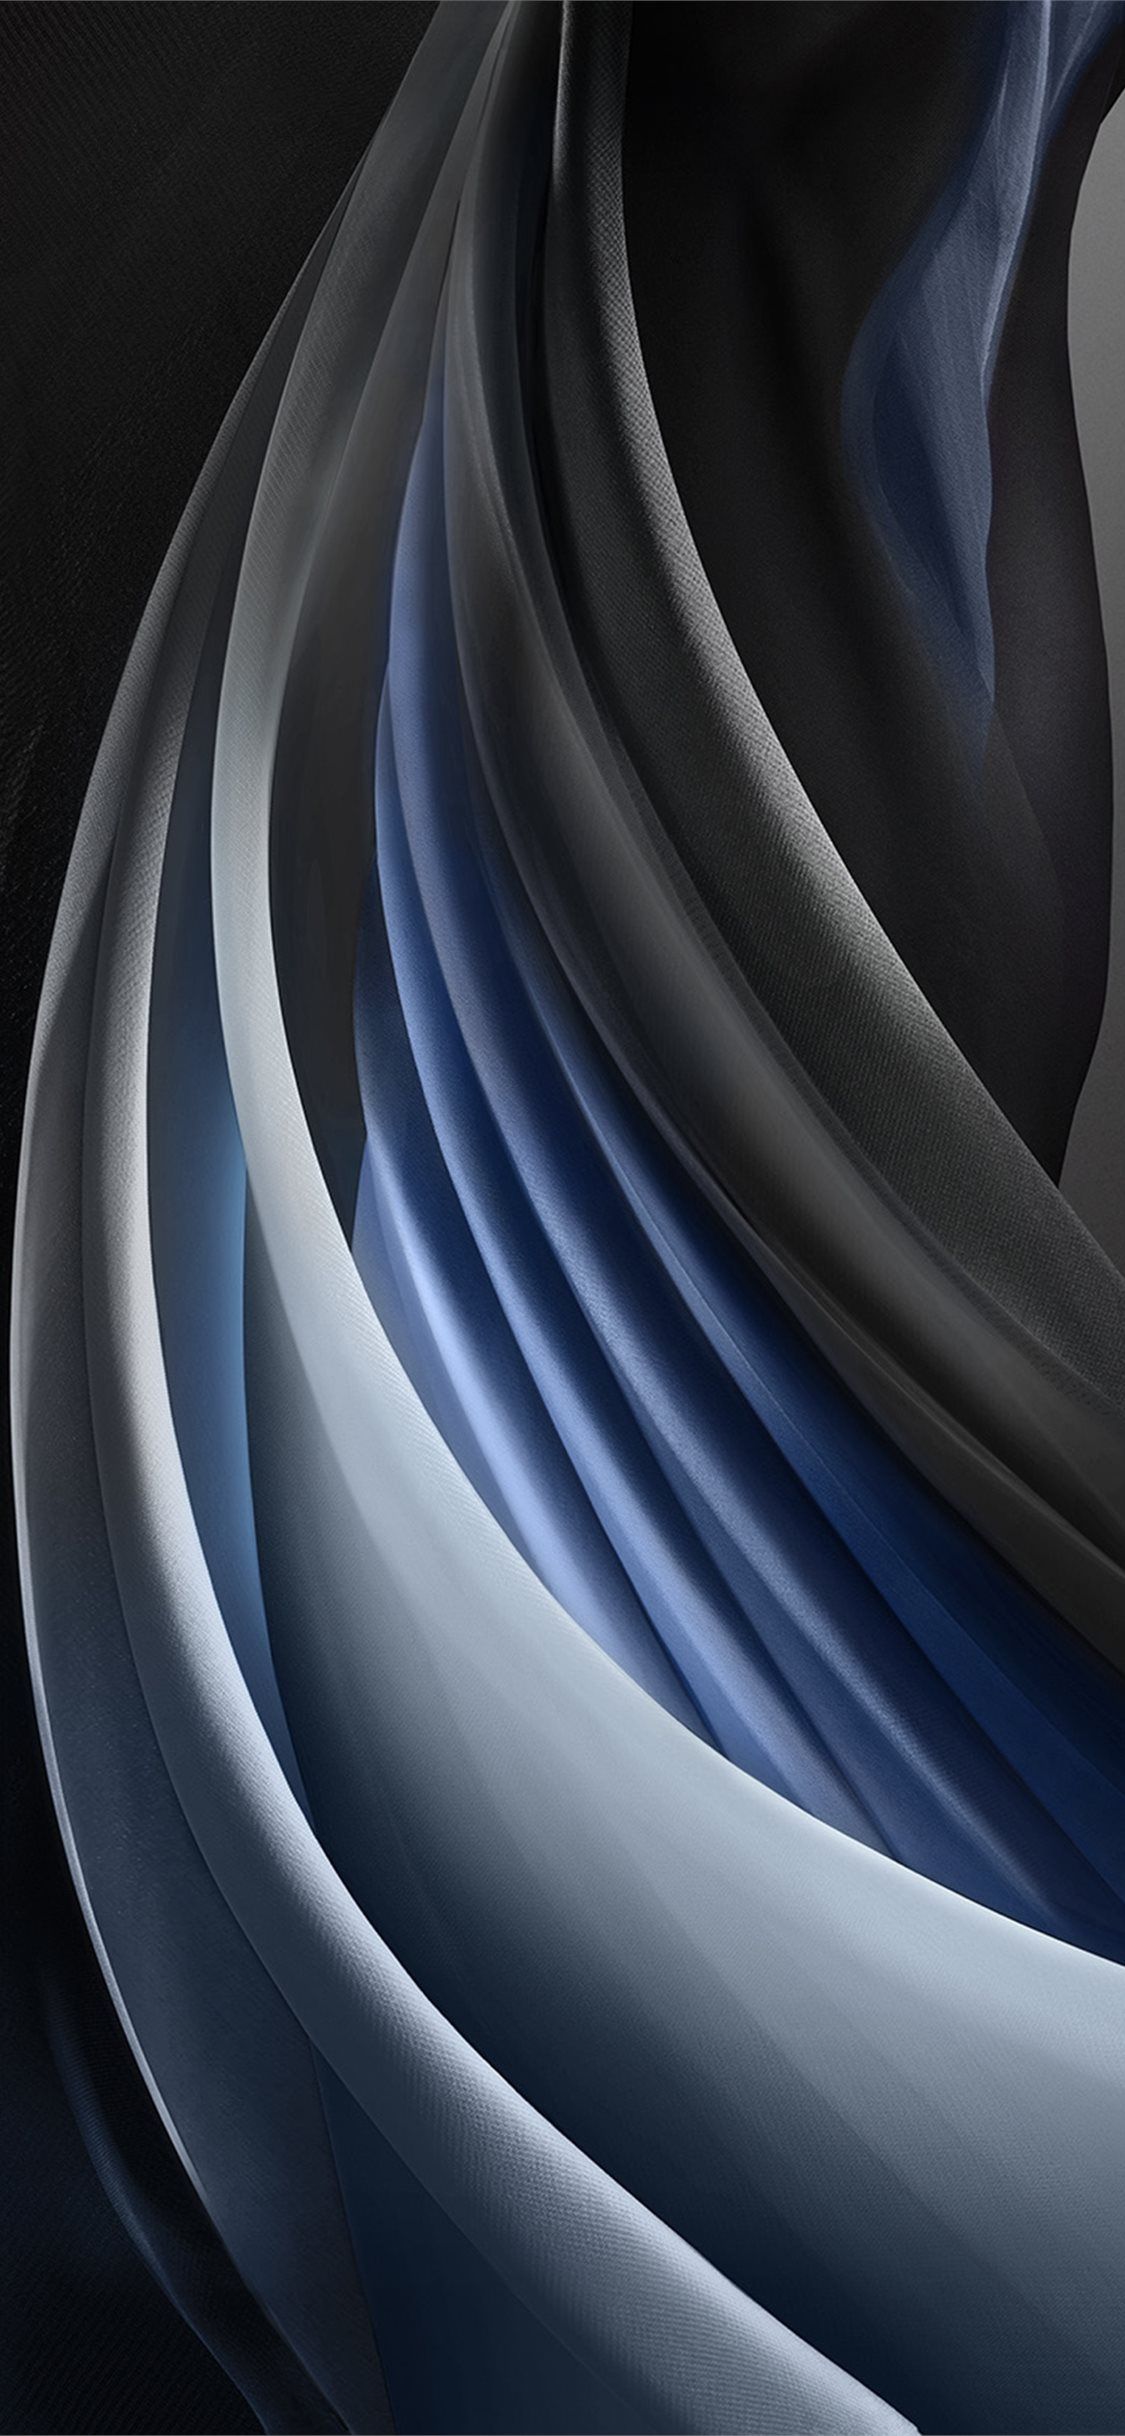 A wave of blue, white and black colors on a black background - Silver